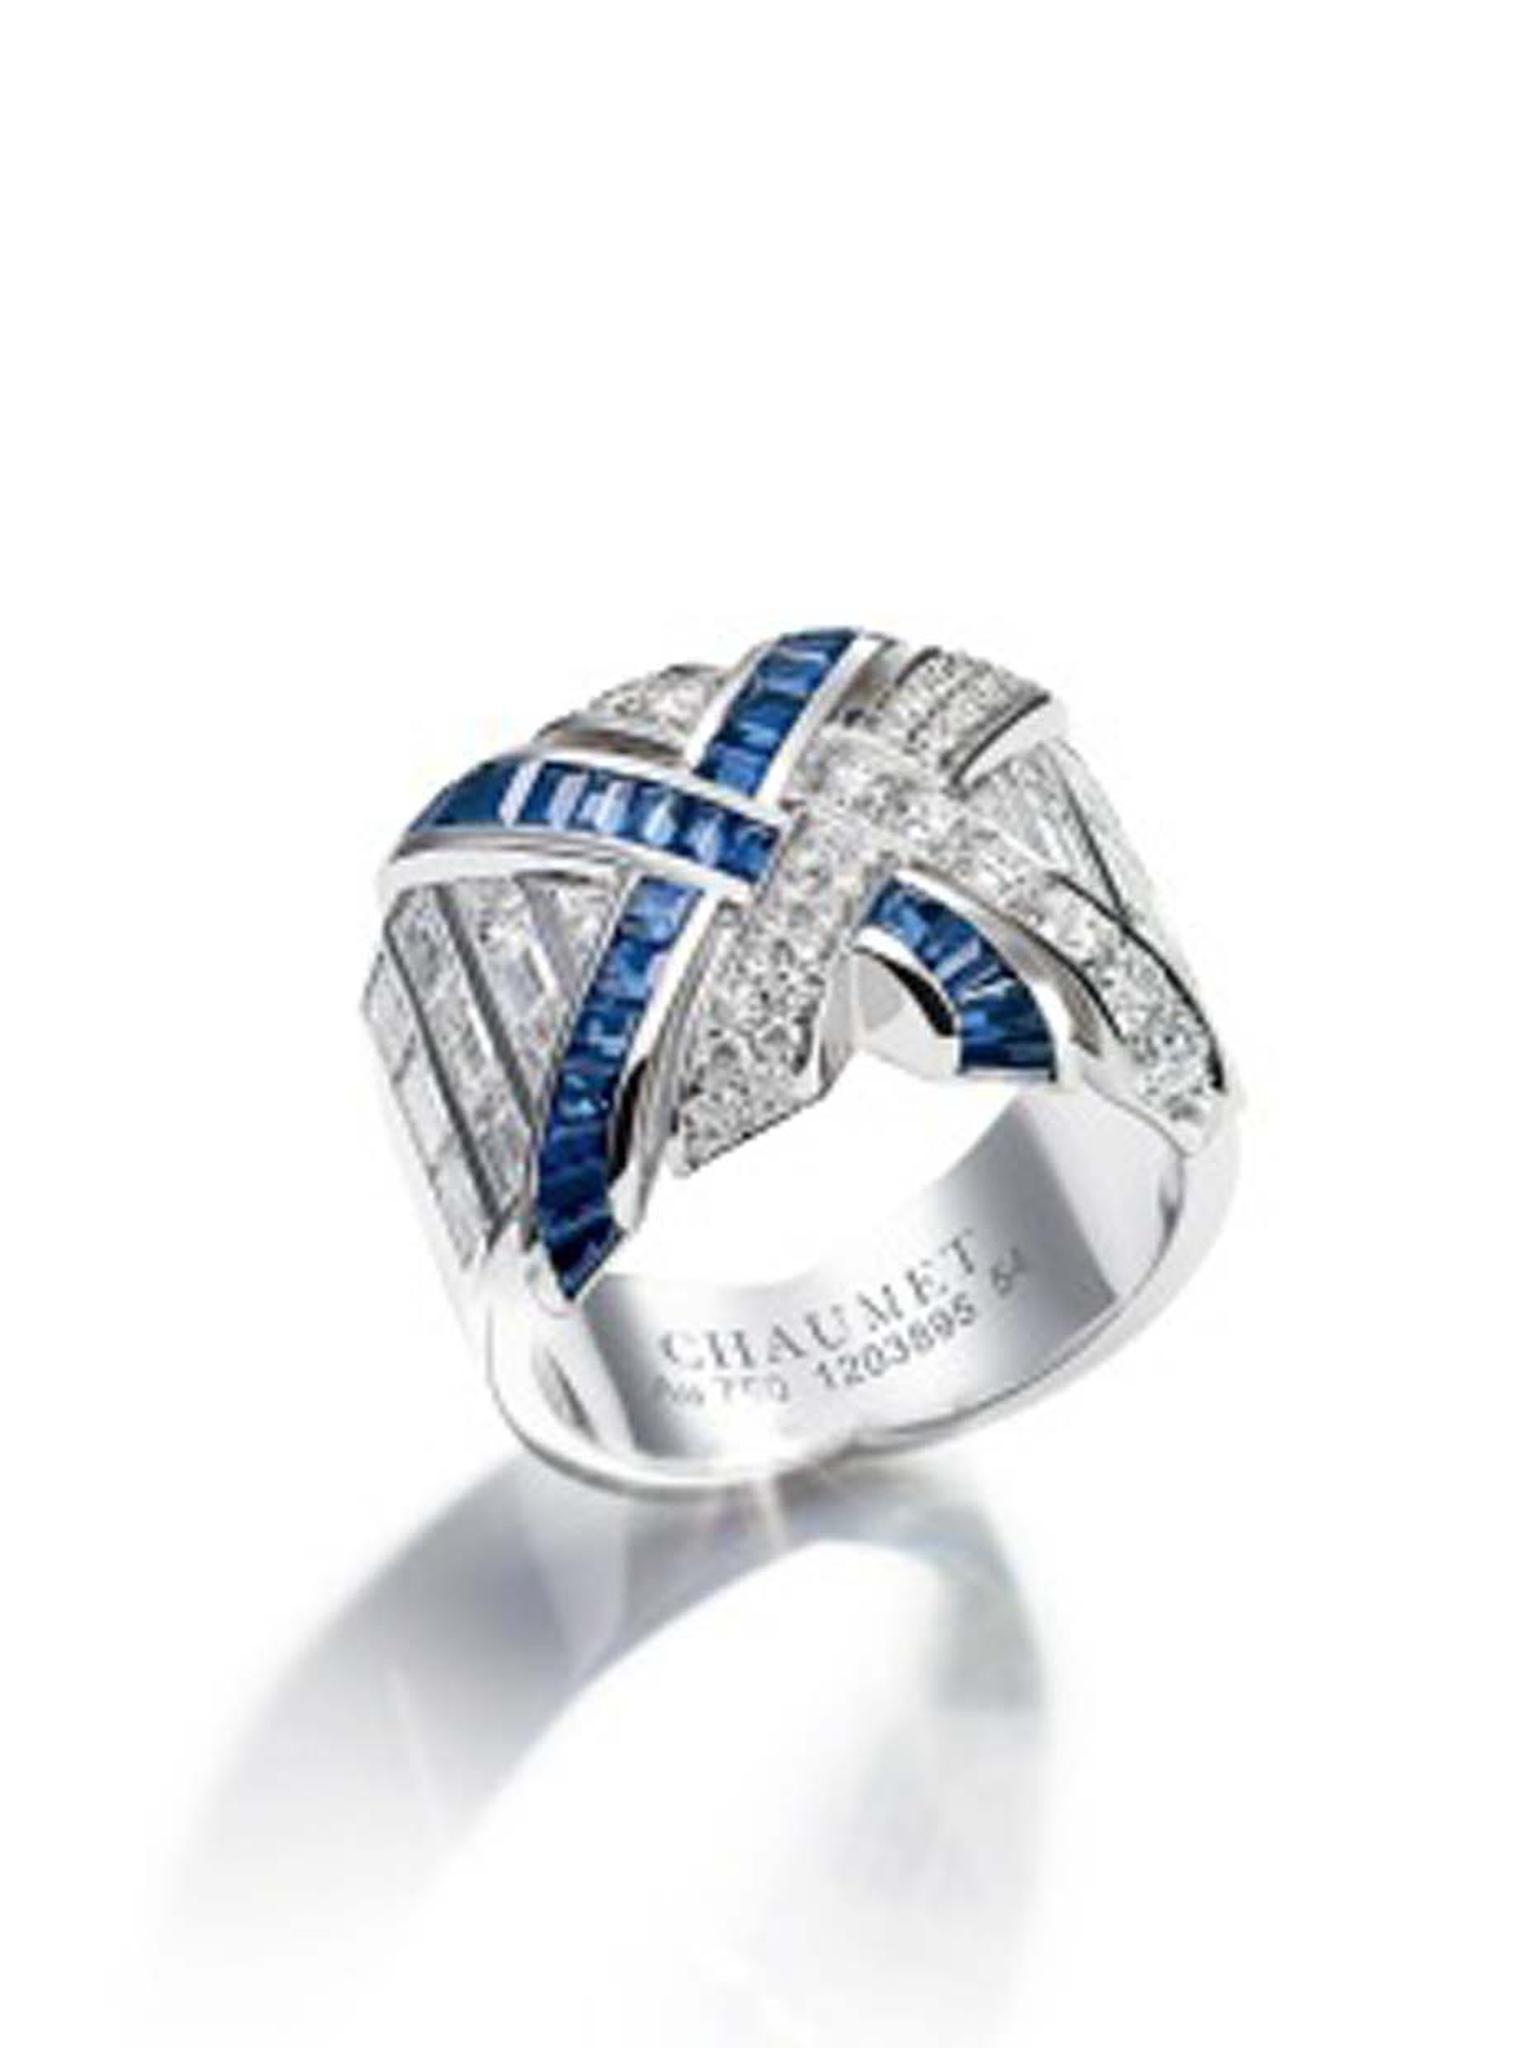 Chaumet Liens ring with diamonds and sapphires.